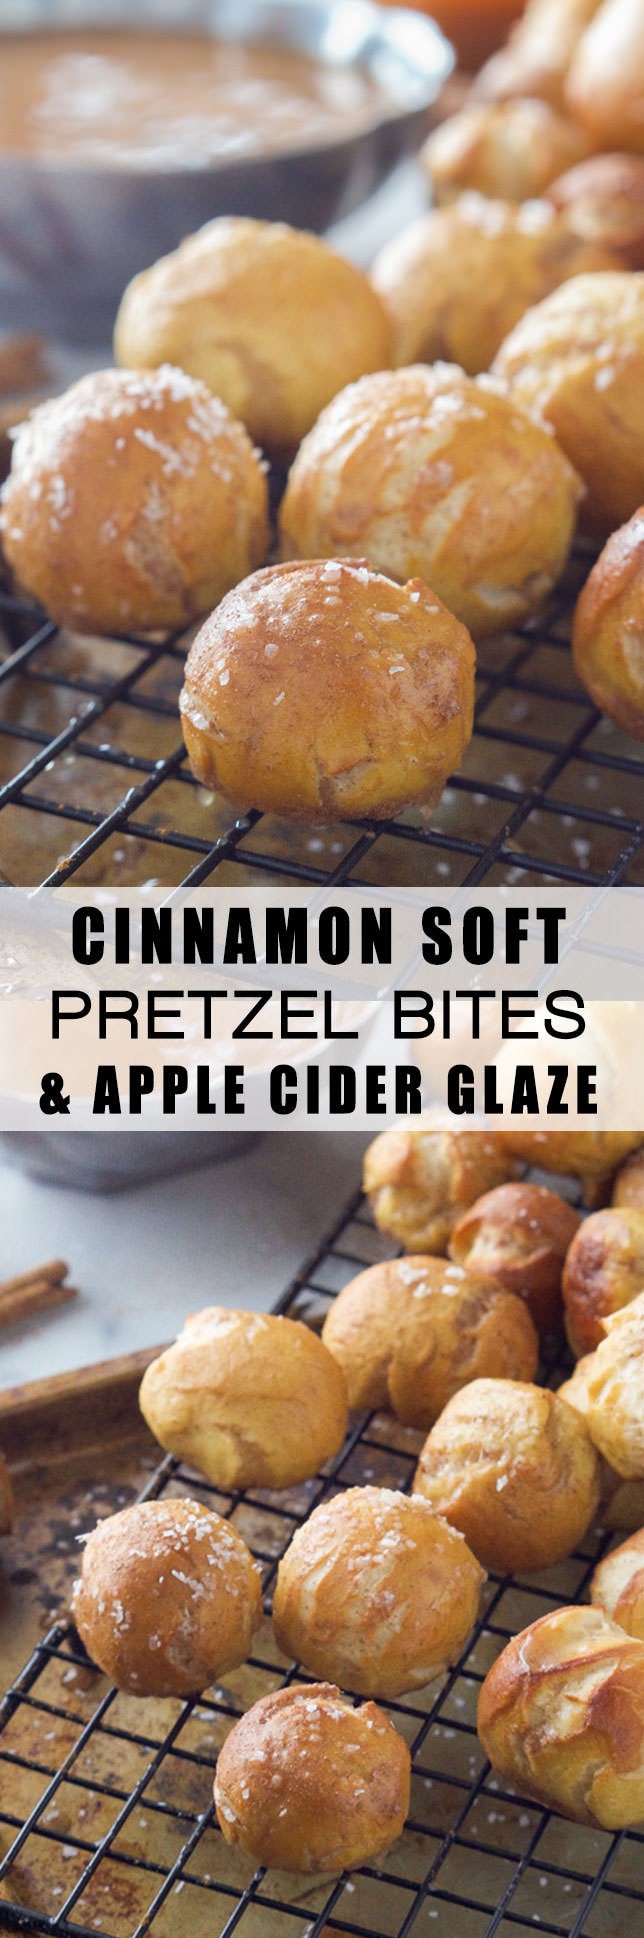 Homemade and easy Cinnamon Soft Pretzel Bites get a fall makeover! Loaded with cinnamon and coated in a light apple cider glaze!